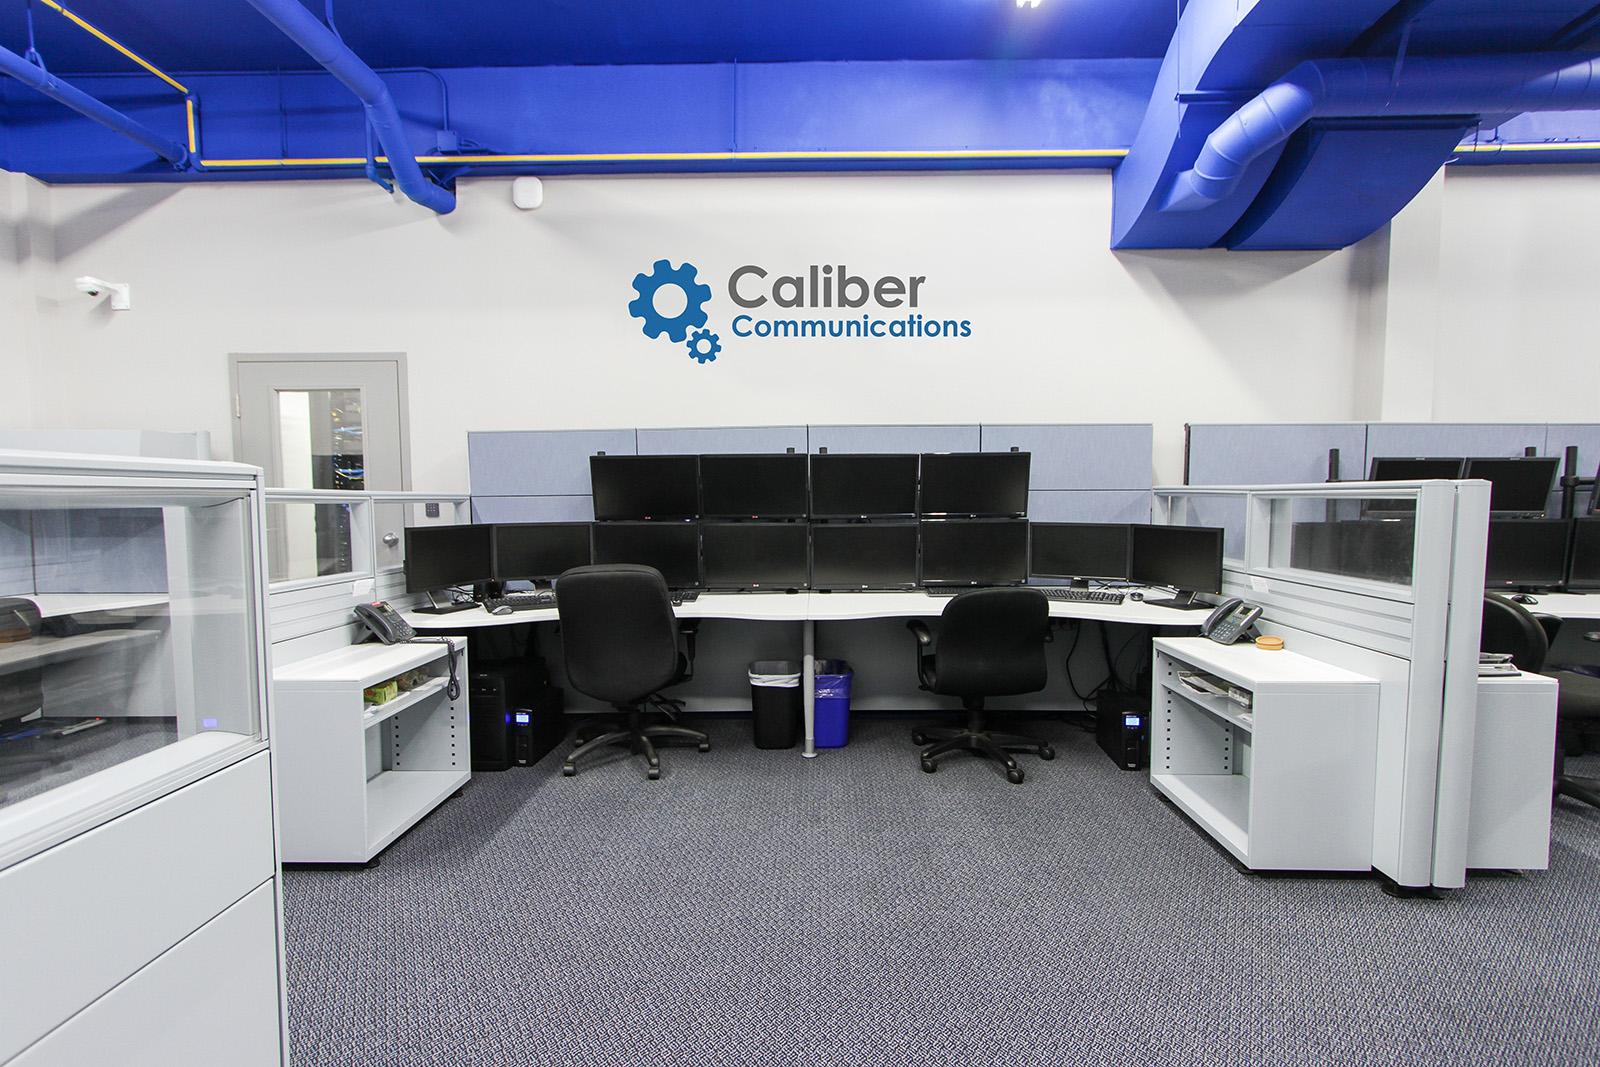 Old caliber communications video monitoring center